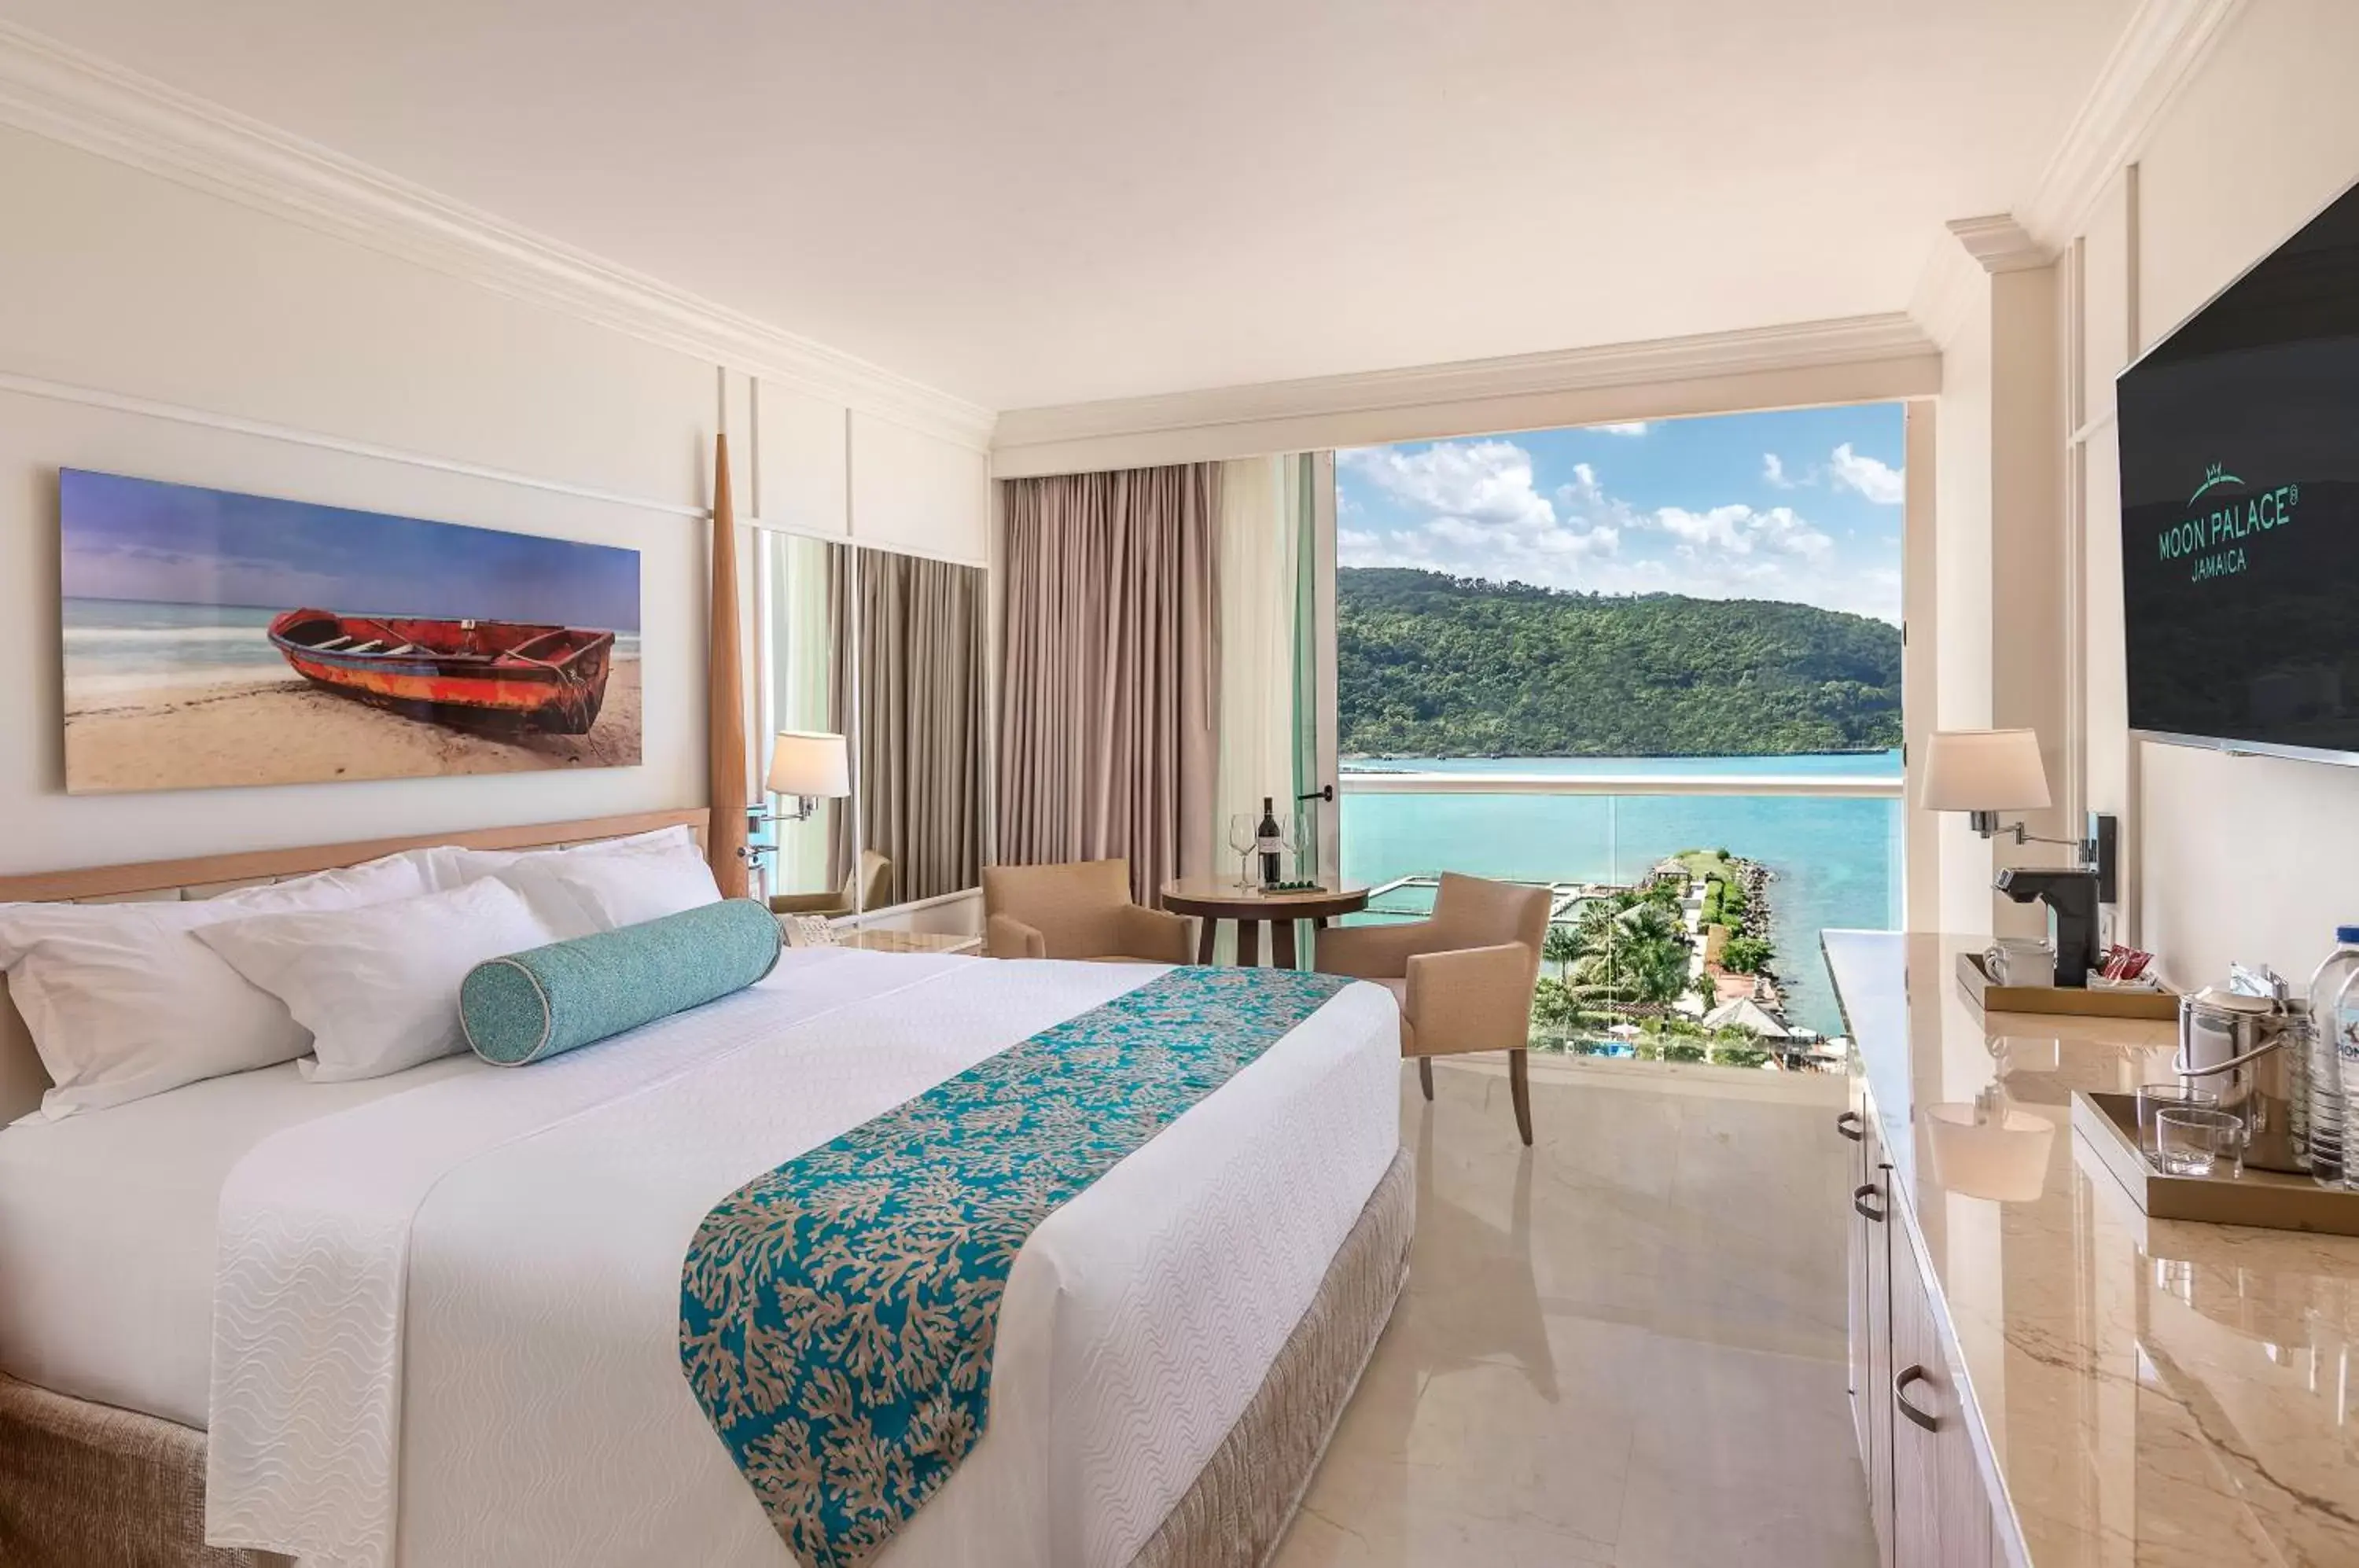 Standard Room with Ocean View in Moon Palace Jamaica